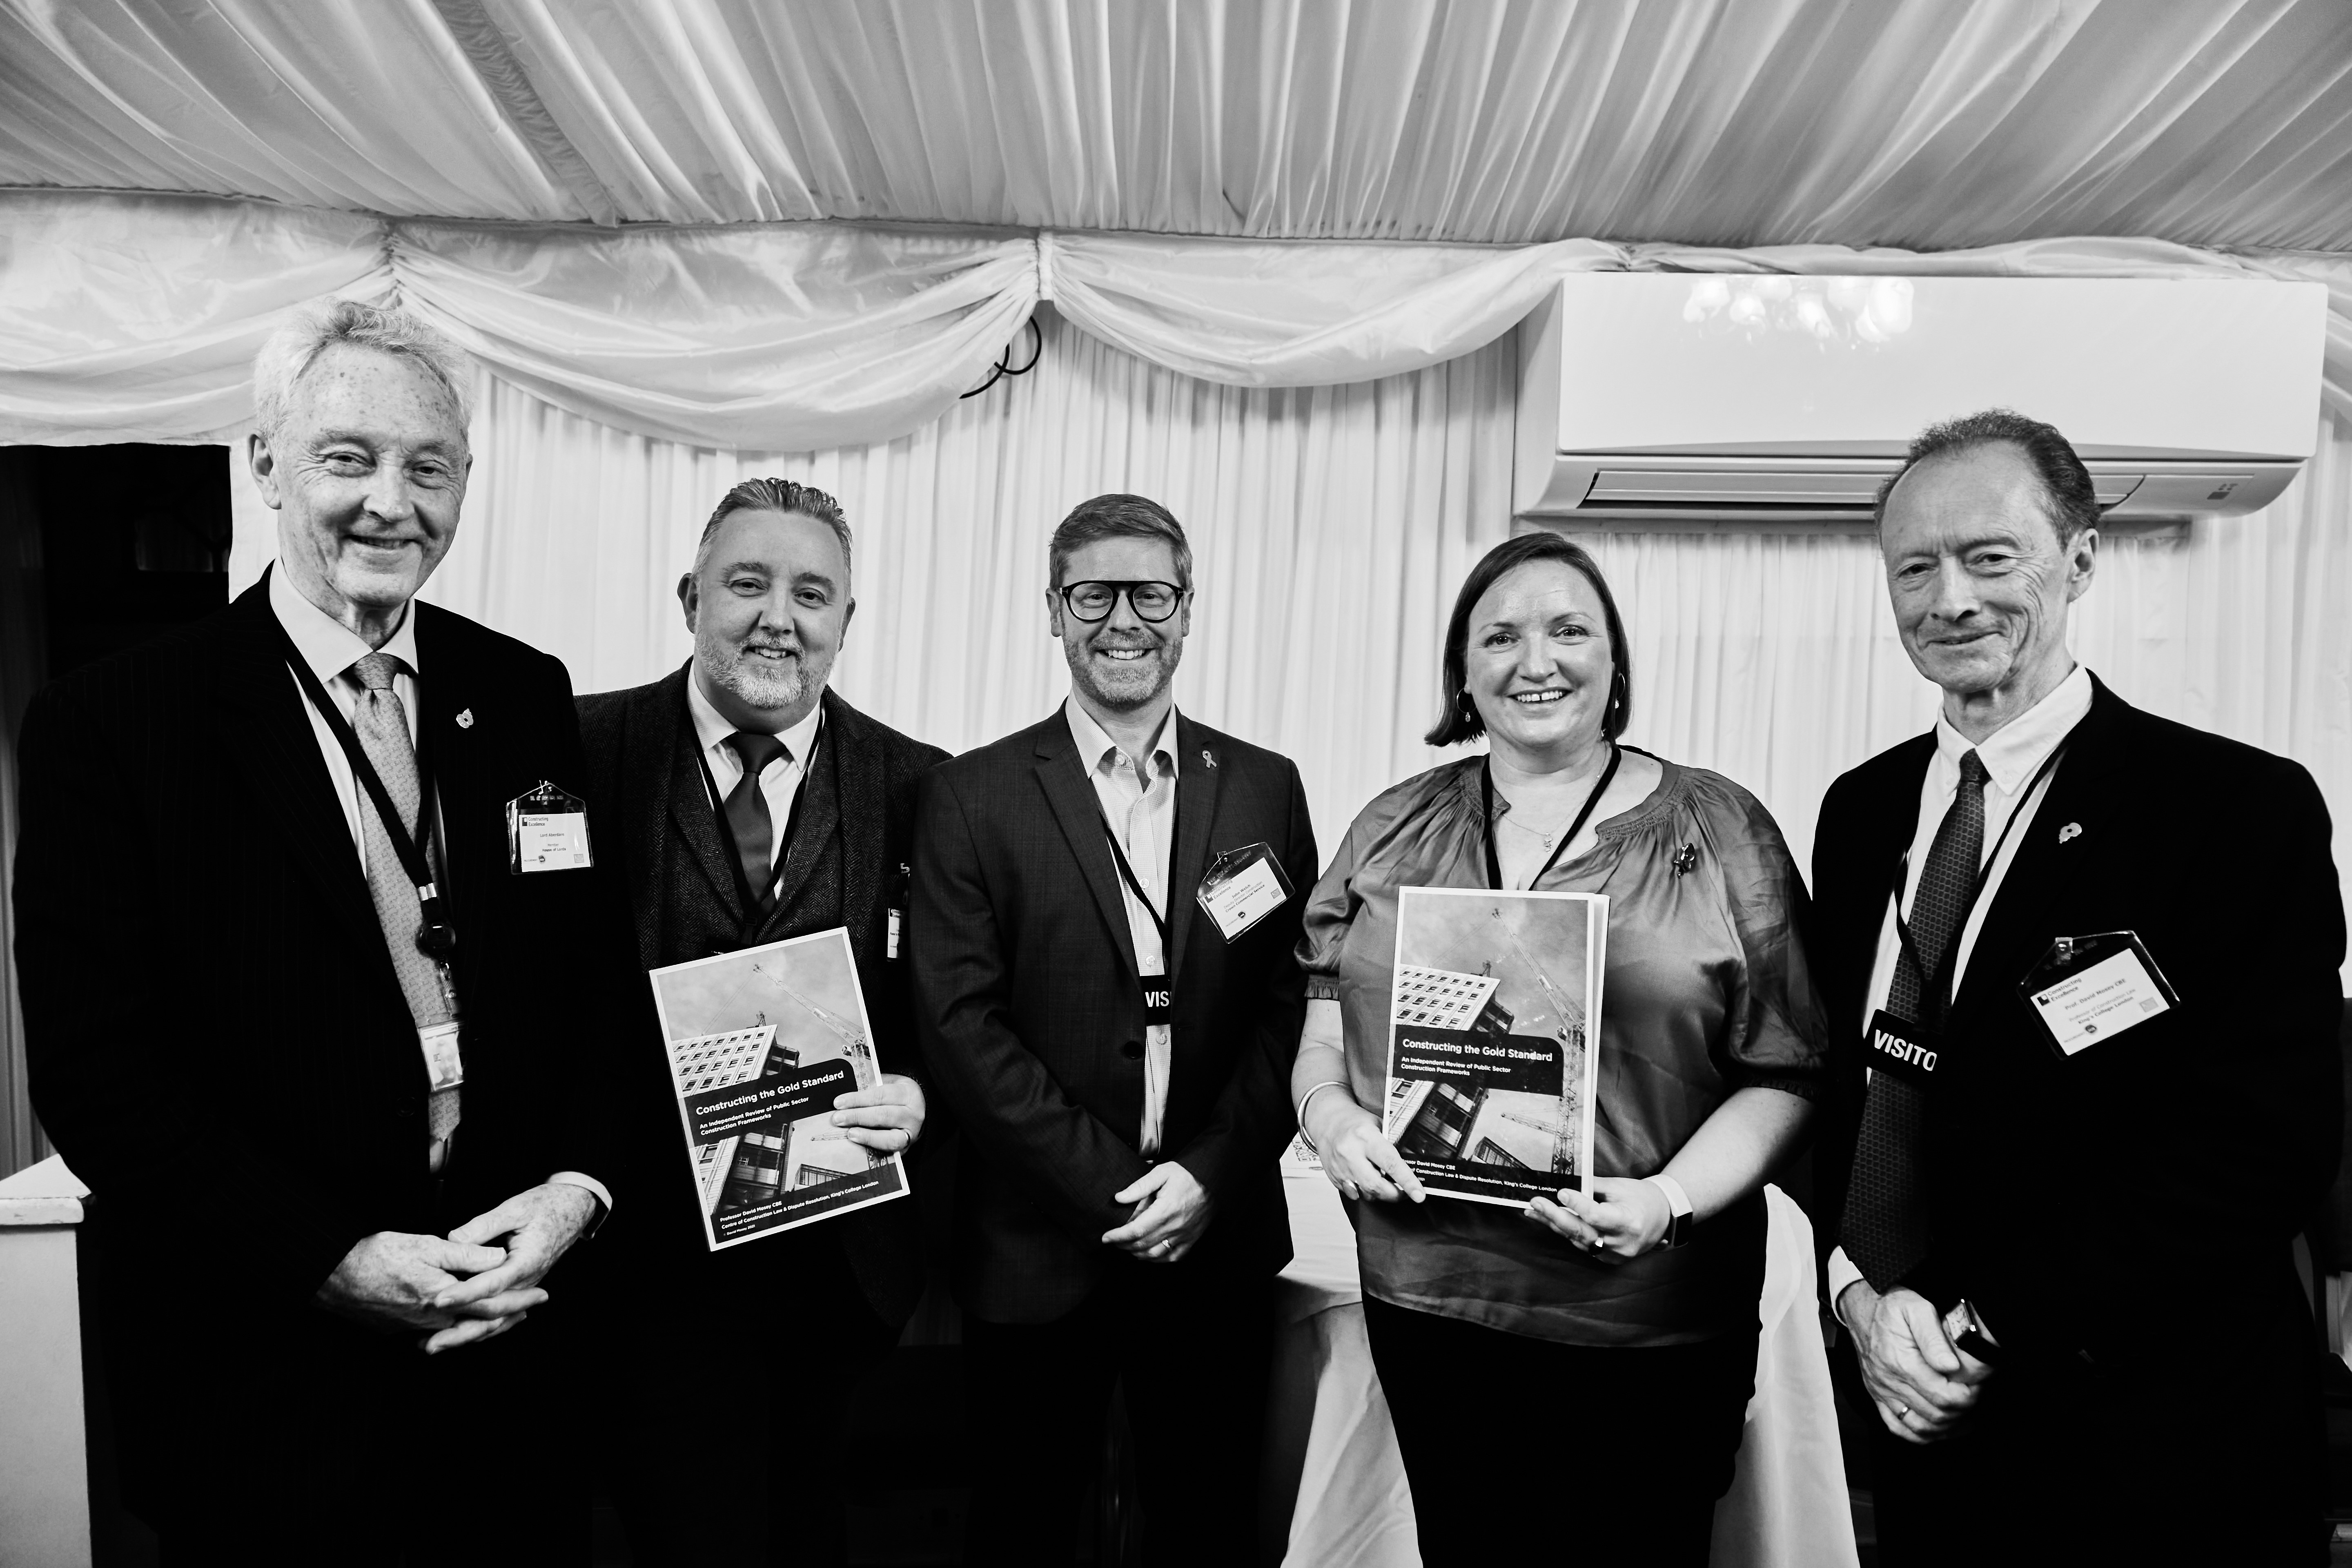 Launch Photo, Lord Aberdare, Alan Heron, Procurement Hub, John Welch, Crown Commercial Service, Alison Nicholl, Head of Constructing Excellence, BRE and Professor David Mosey CBE, Kings College London